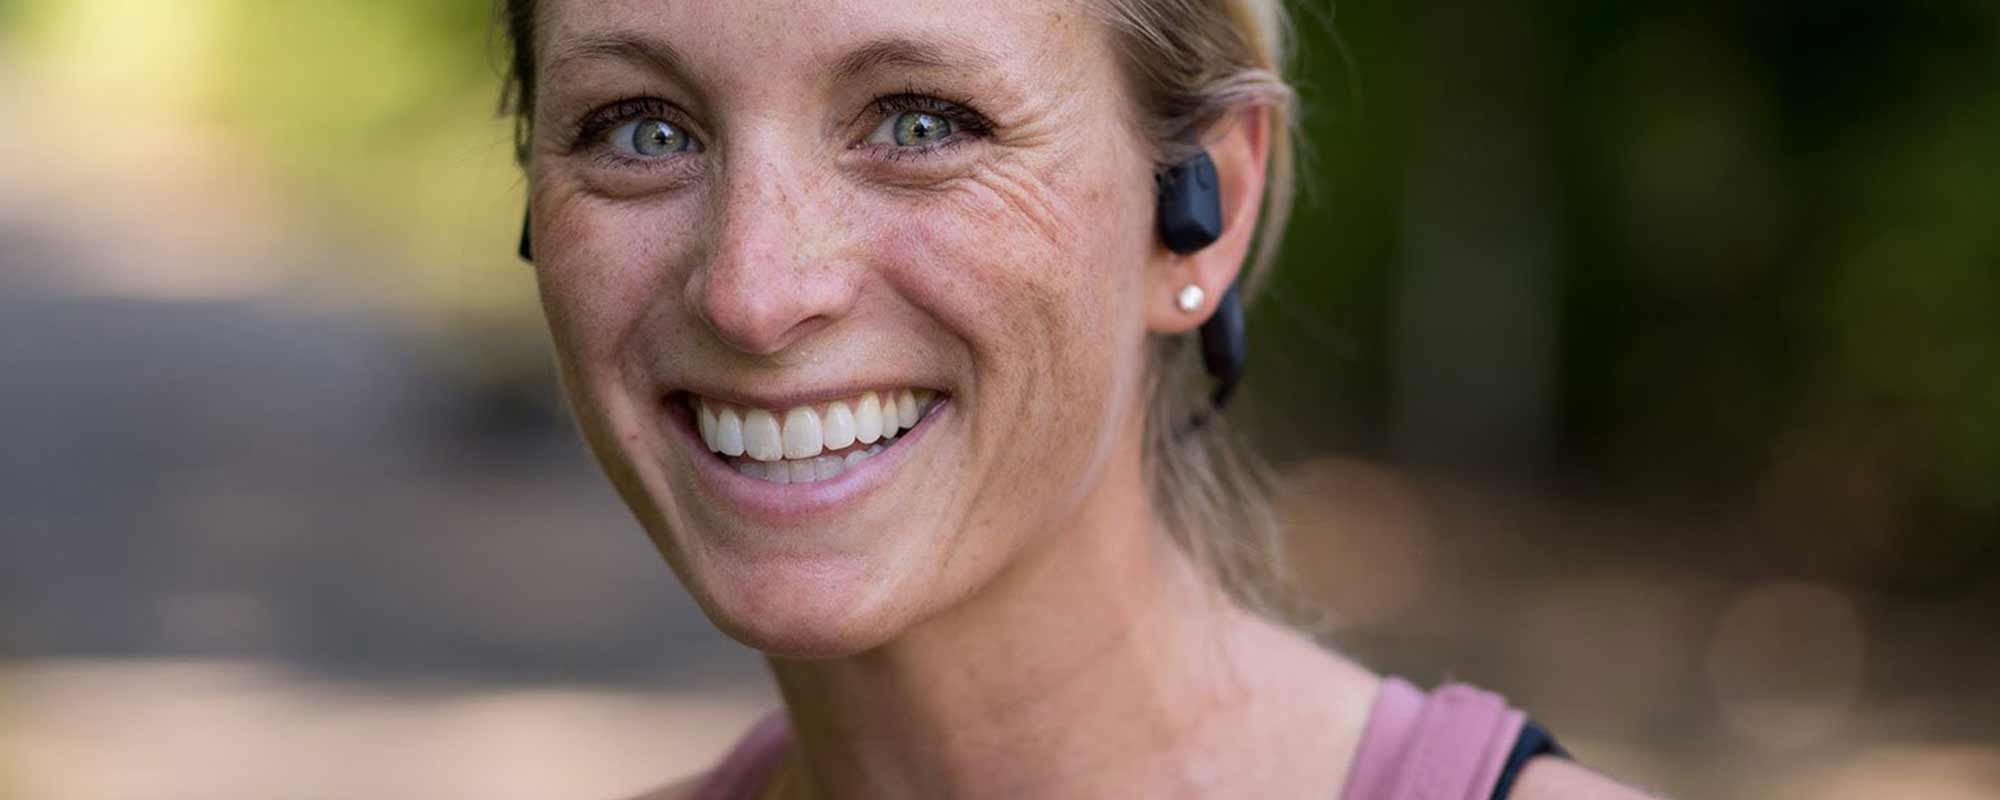 Q&A with Runner and Podcaster Lindsey Hein